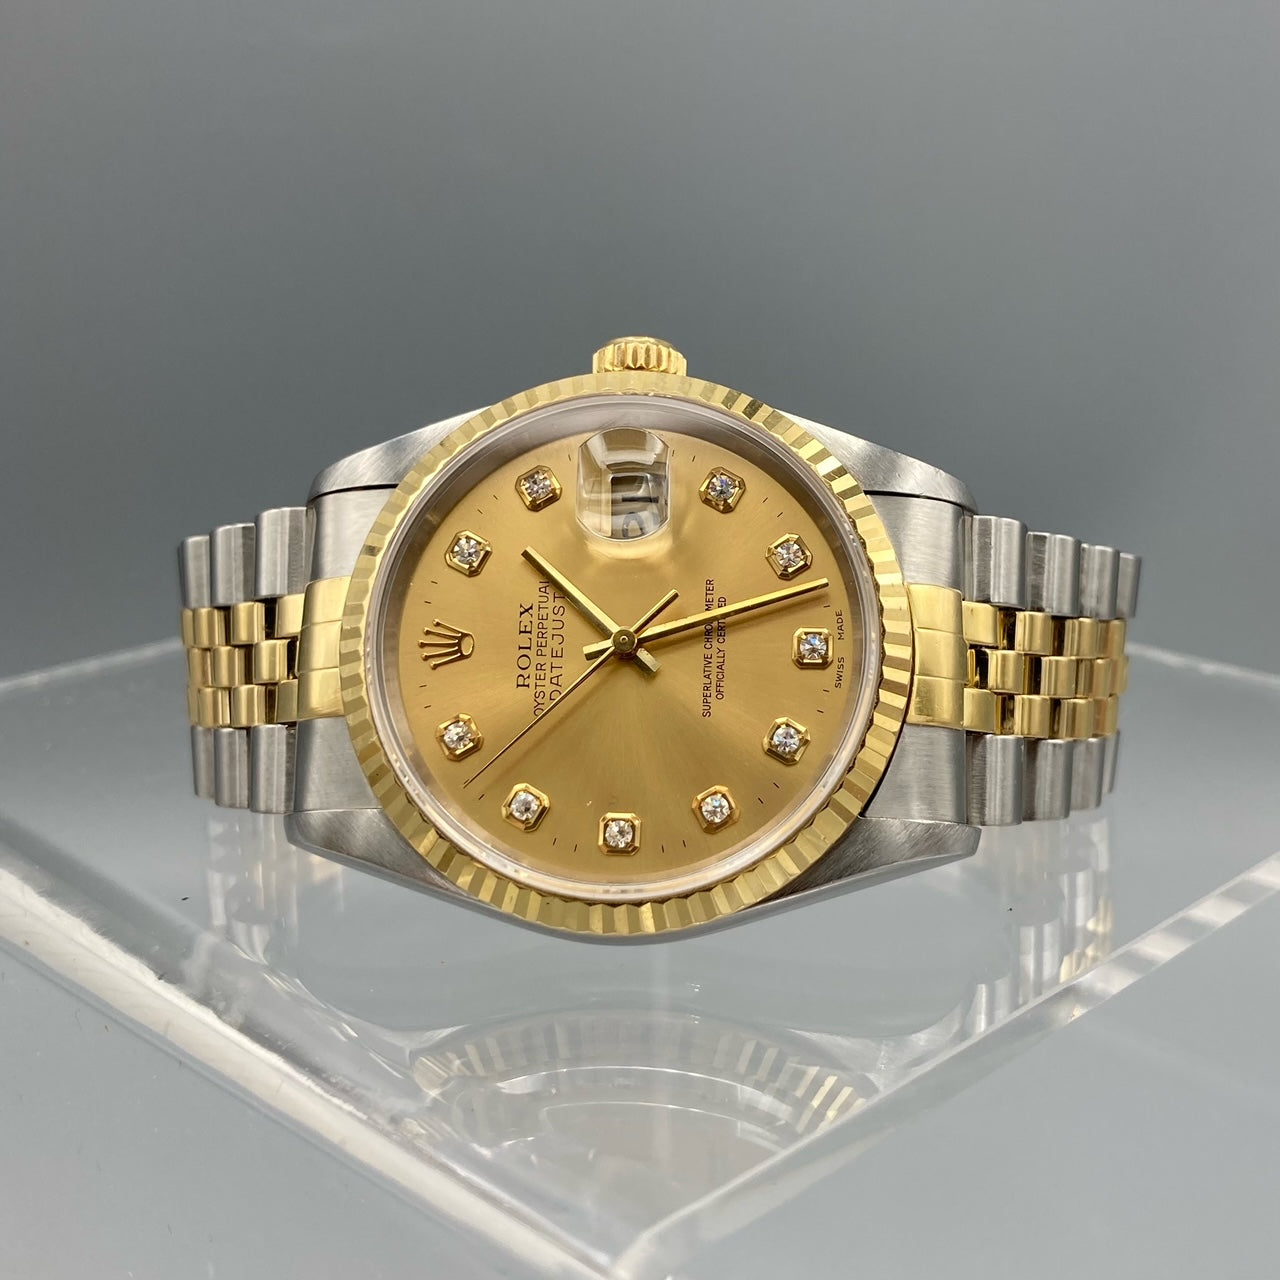 Rolex Datejust 36 Champagne Diamond Dial SS/18kt Solid Gold - 16233